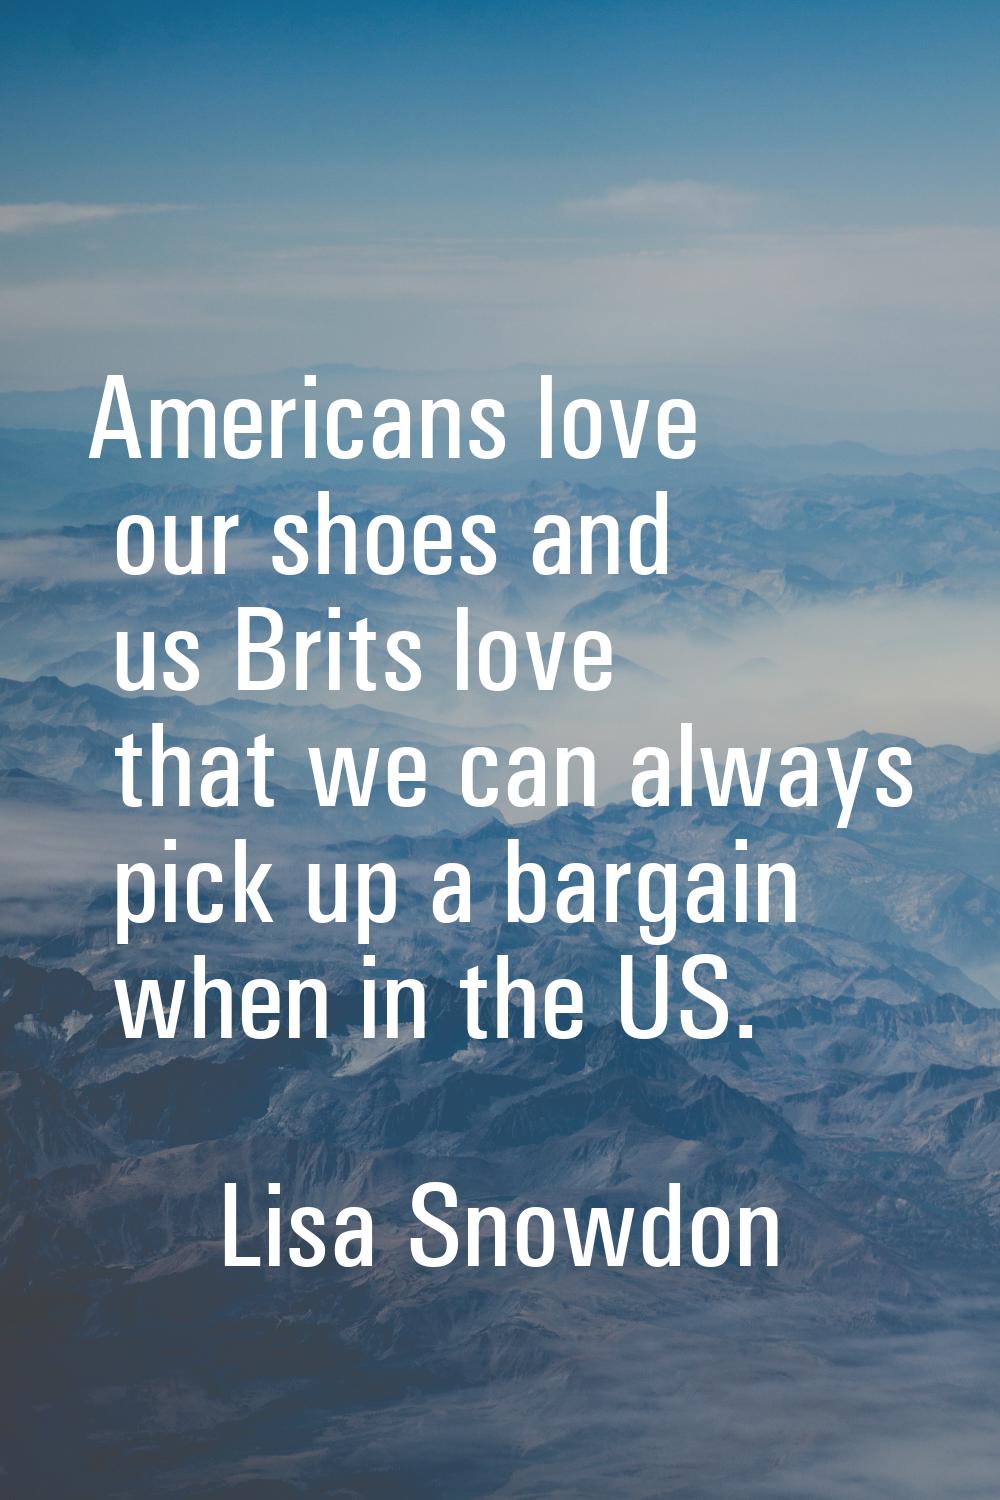 Americans love our shoes and us Brits love that we can always pick up a bargain when in the US.